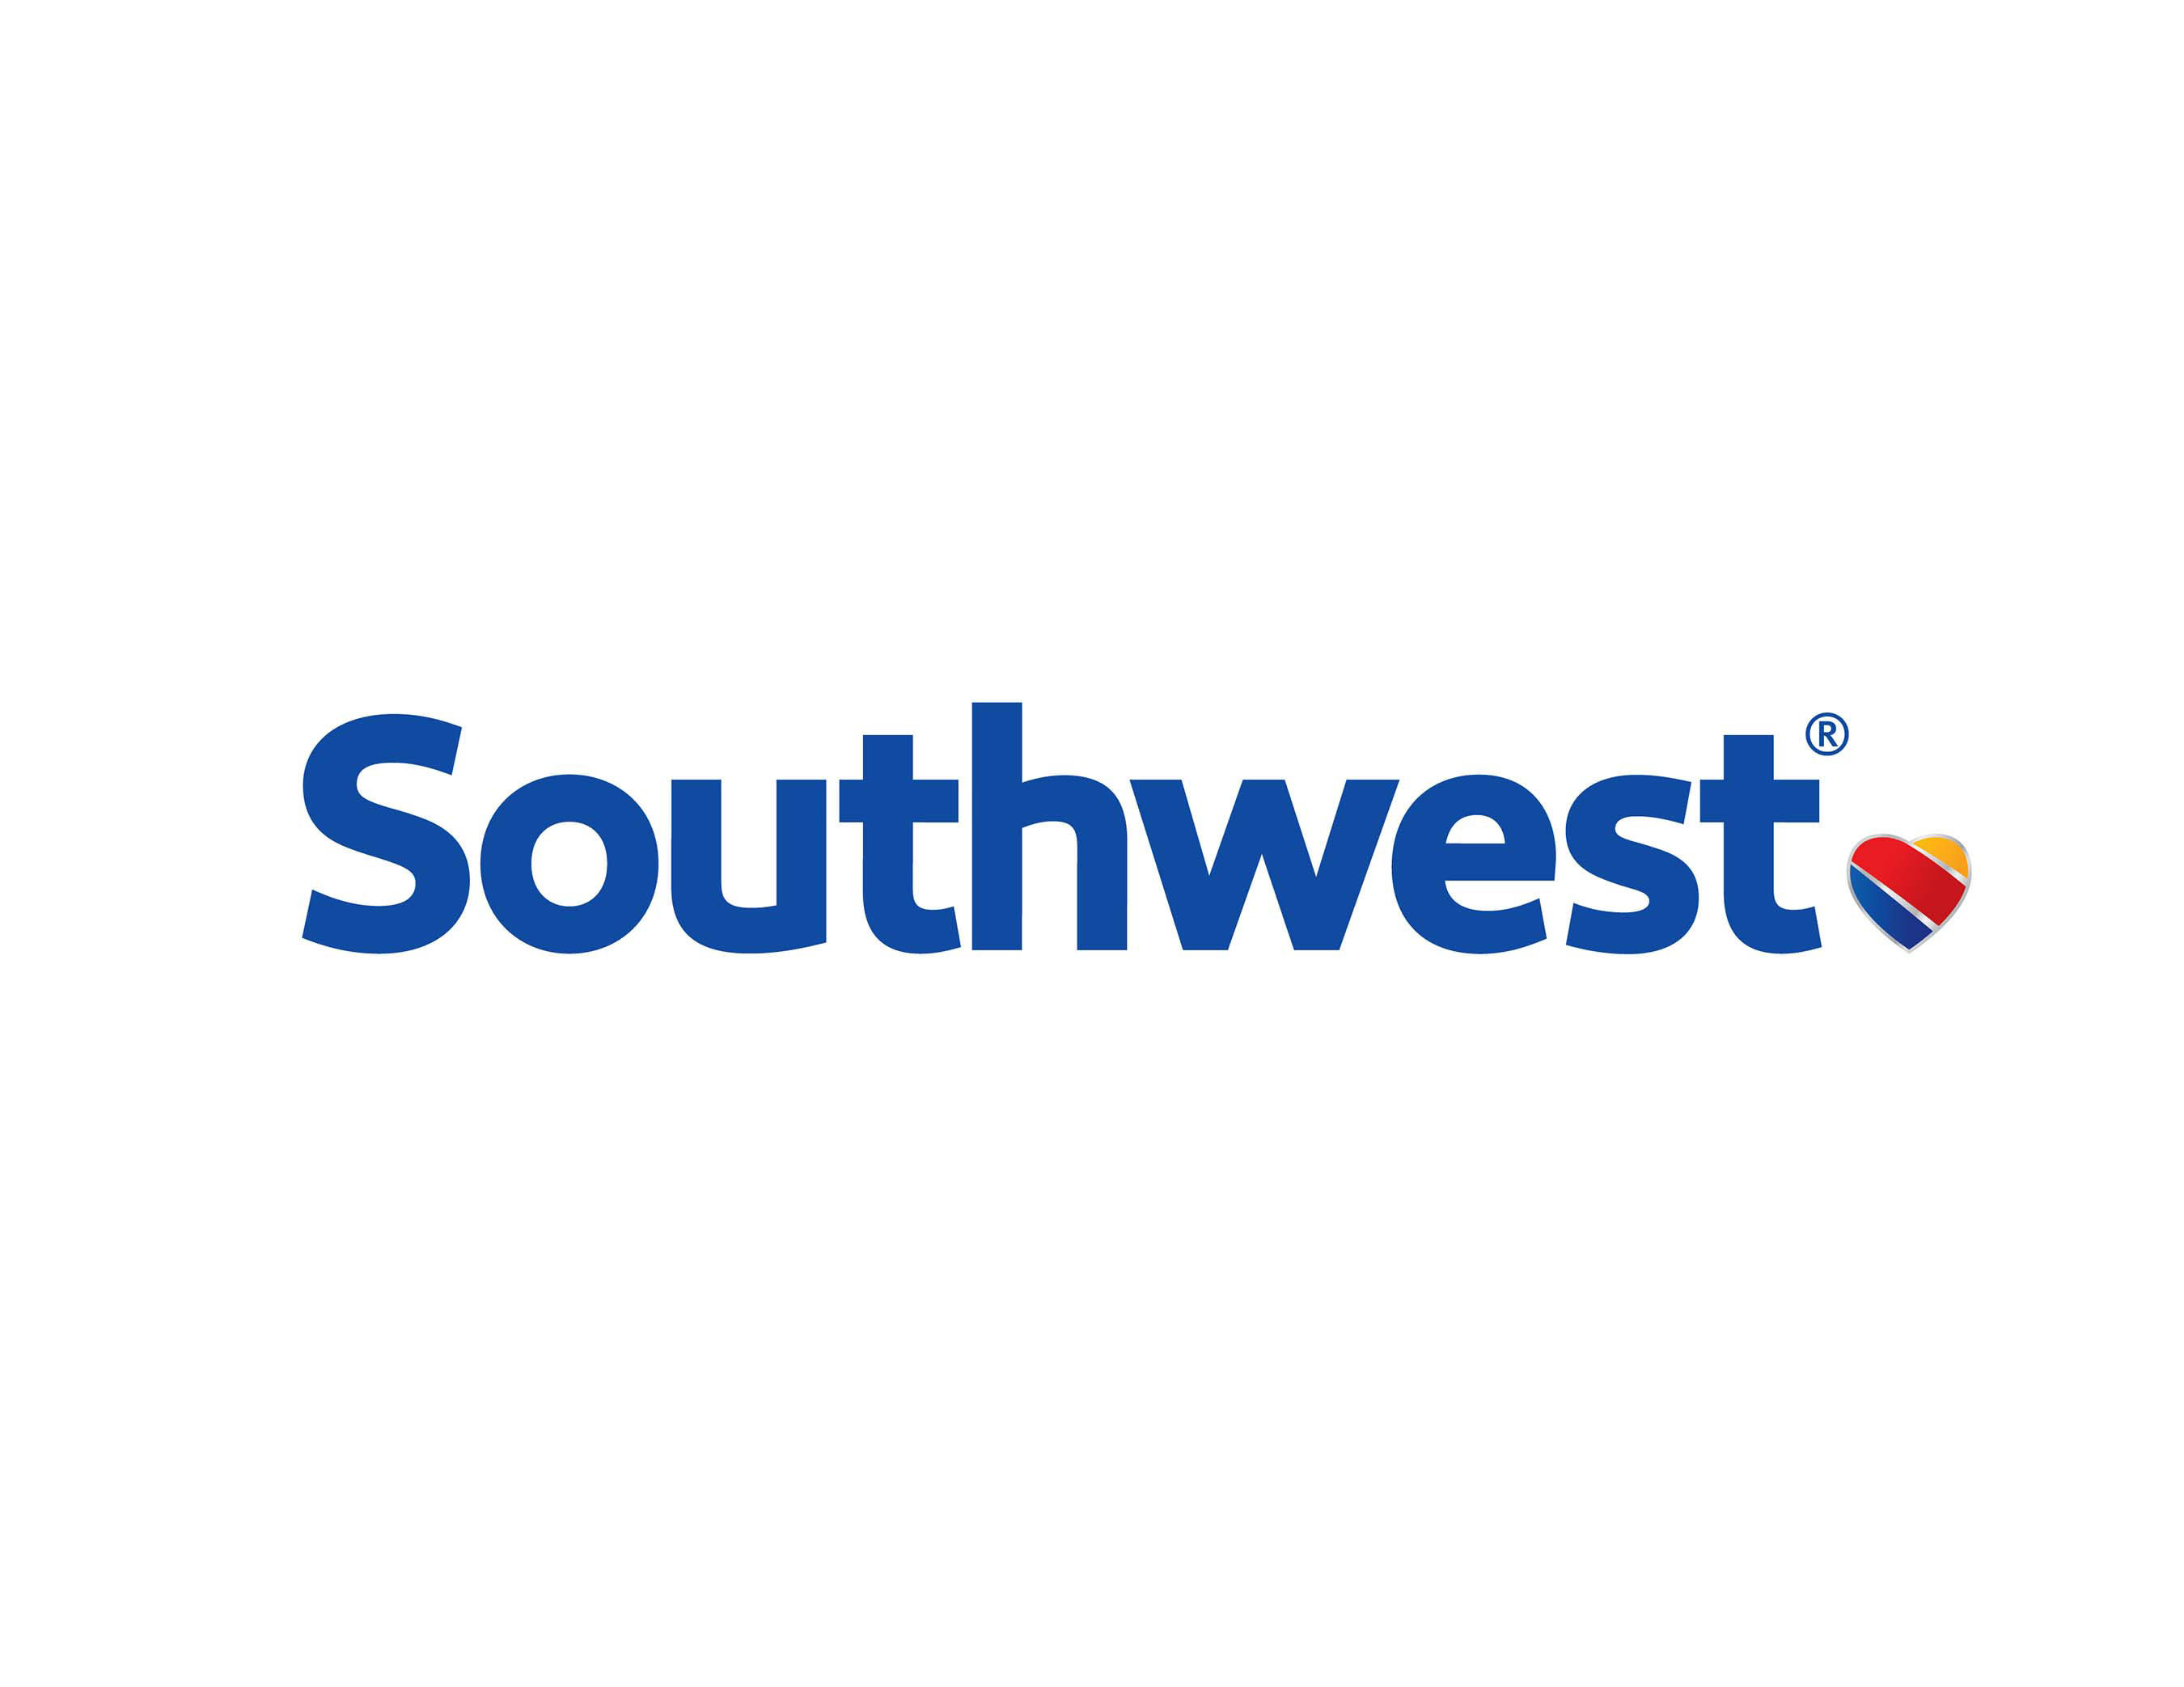 Buy research papers online cheap south west airline